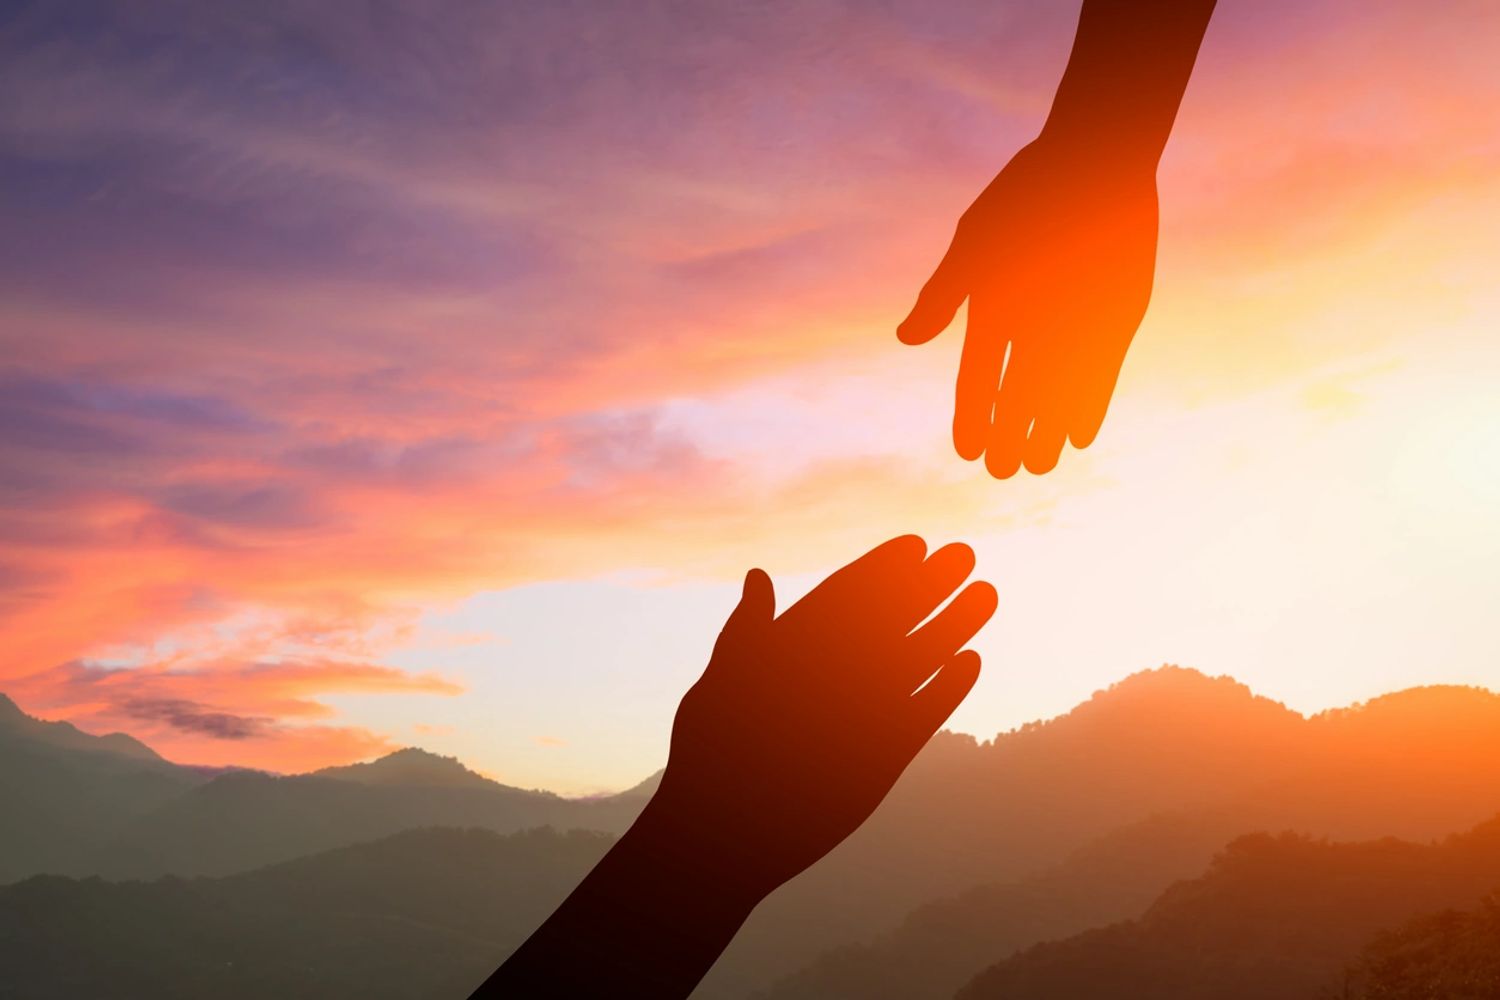 Hands reach for each other with a sunrise in the background.